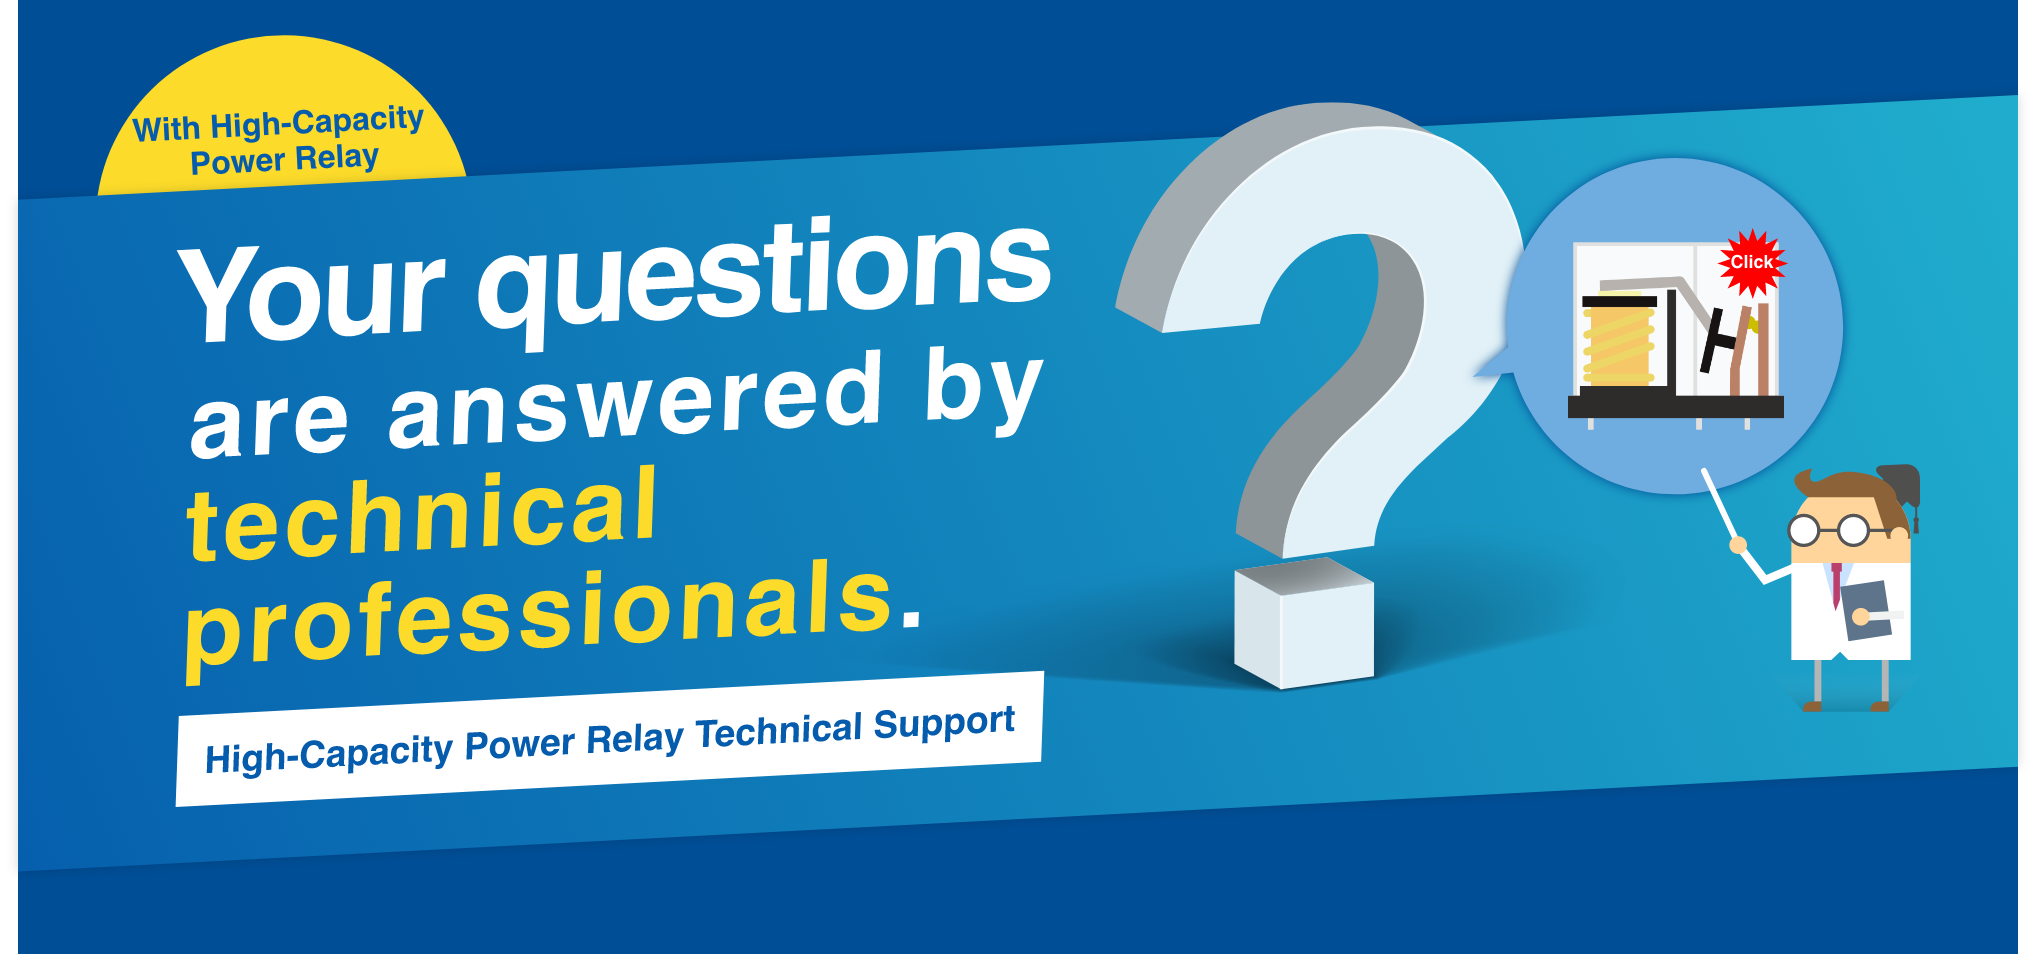 With High-Capacity Power Relay Your questions are answered by technical professionals. High-Capacity Power Relay Technical Support